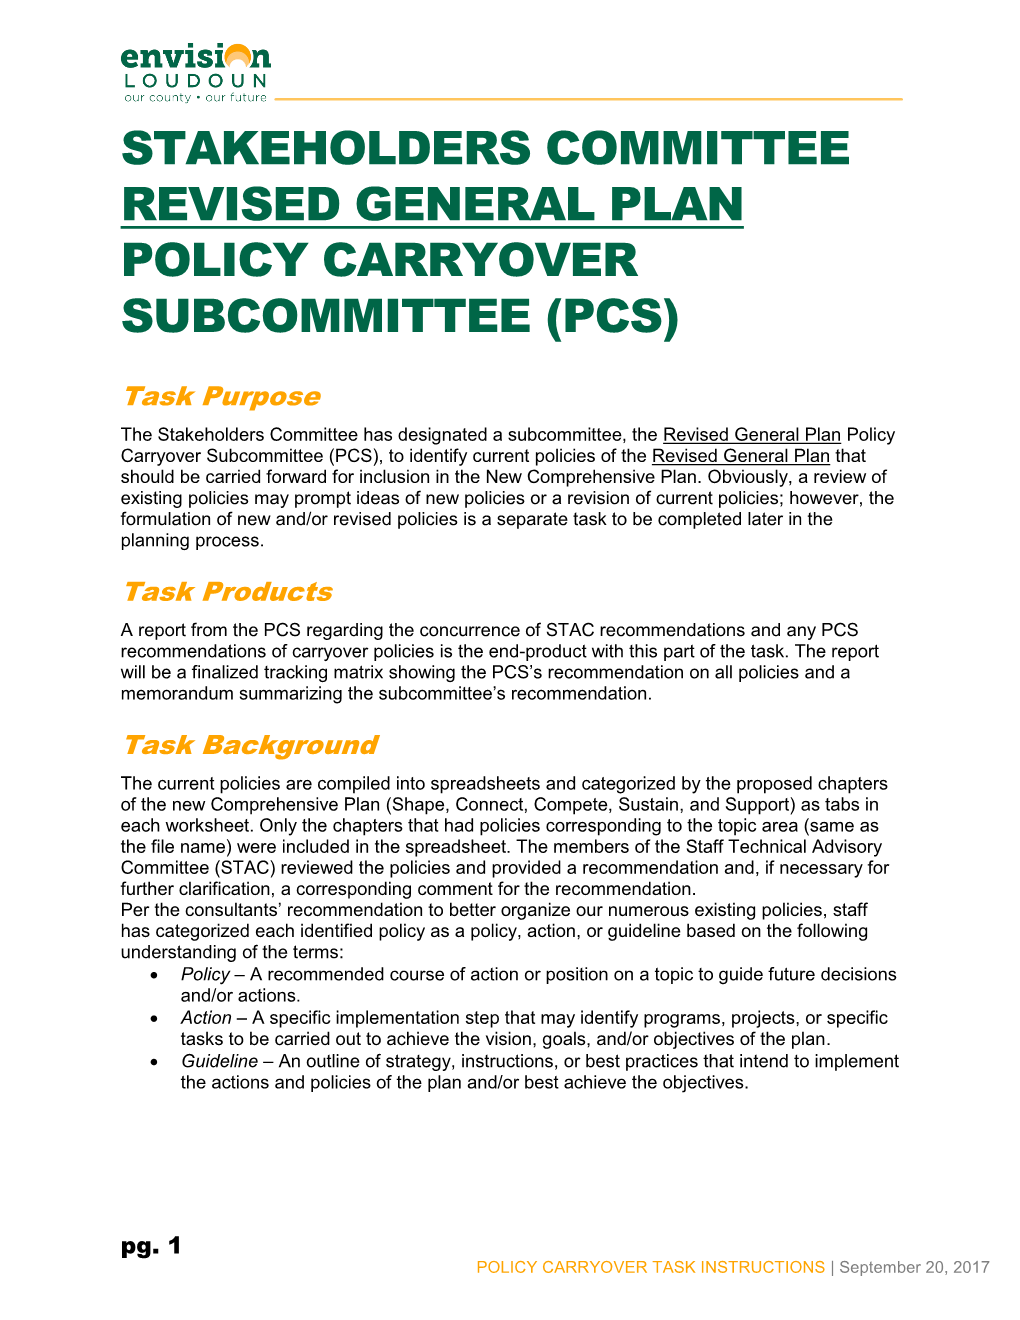 Stakeholders Committee Revised General Plan Policy Carryover Subcommittee (Pcs)